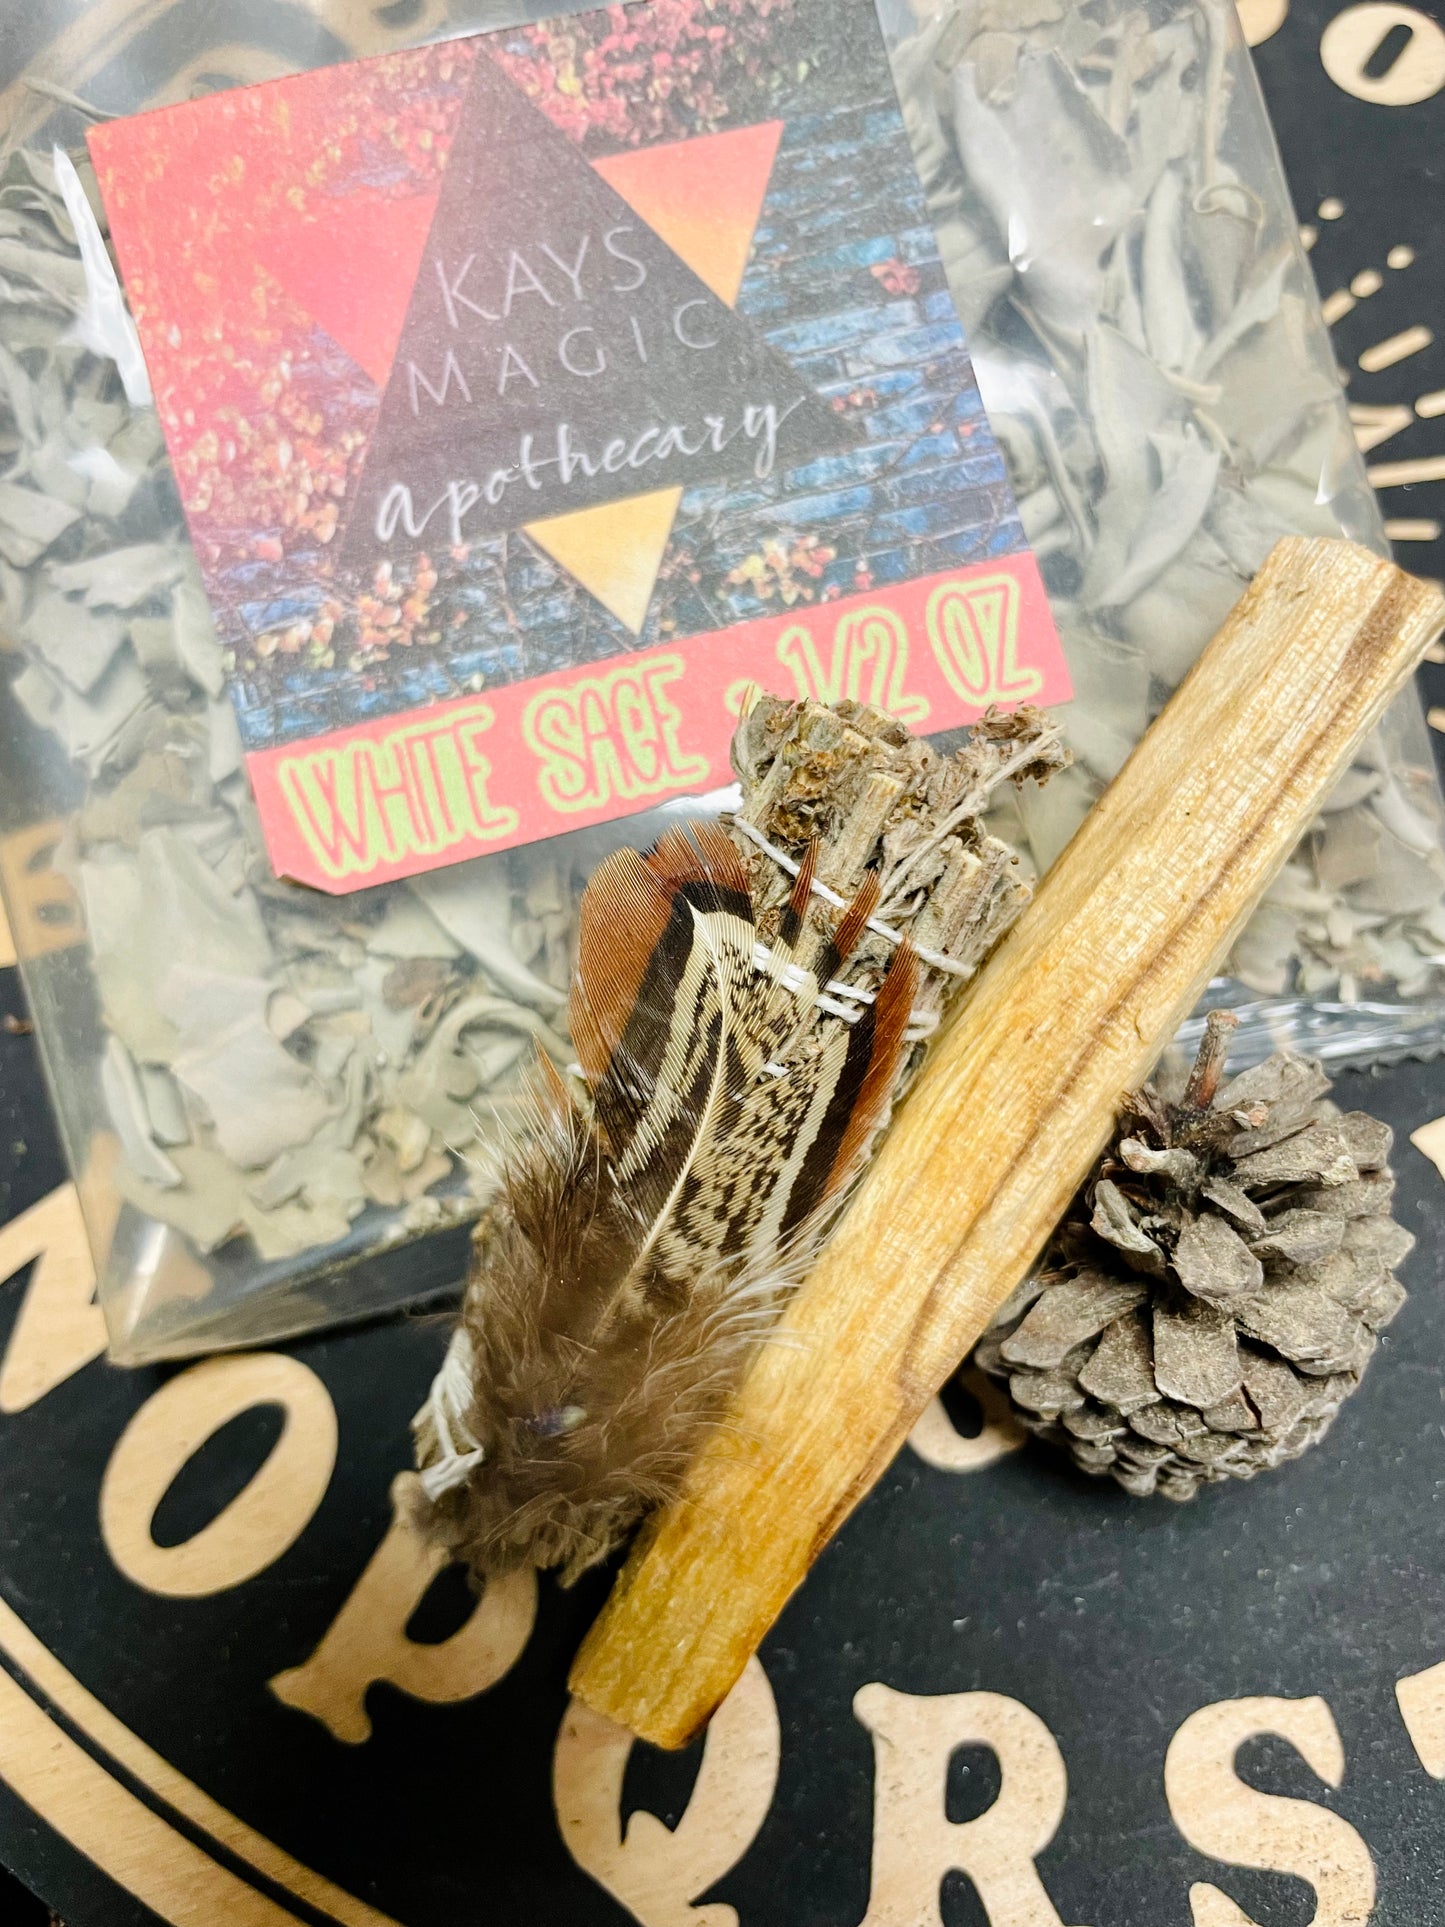 Mugwort Smudge Stick / Loose White Sage / Palo Santo with Smudging Feather, 4 Pc